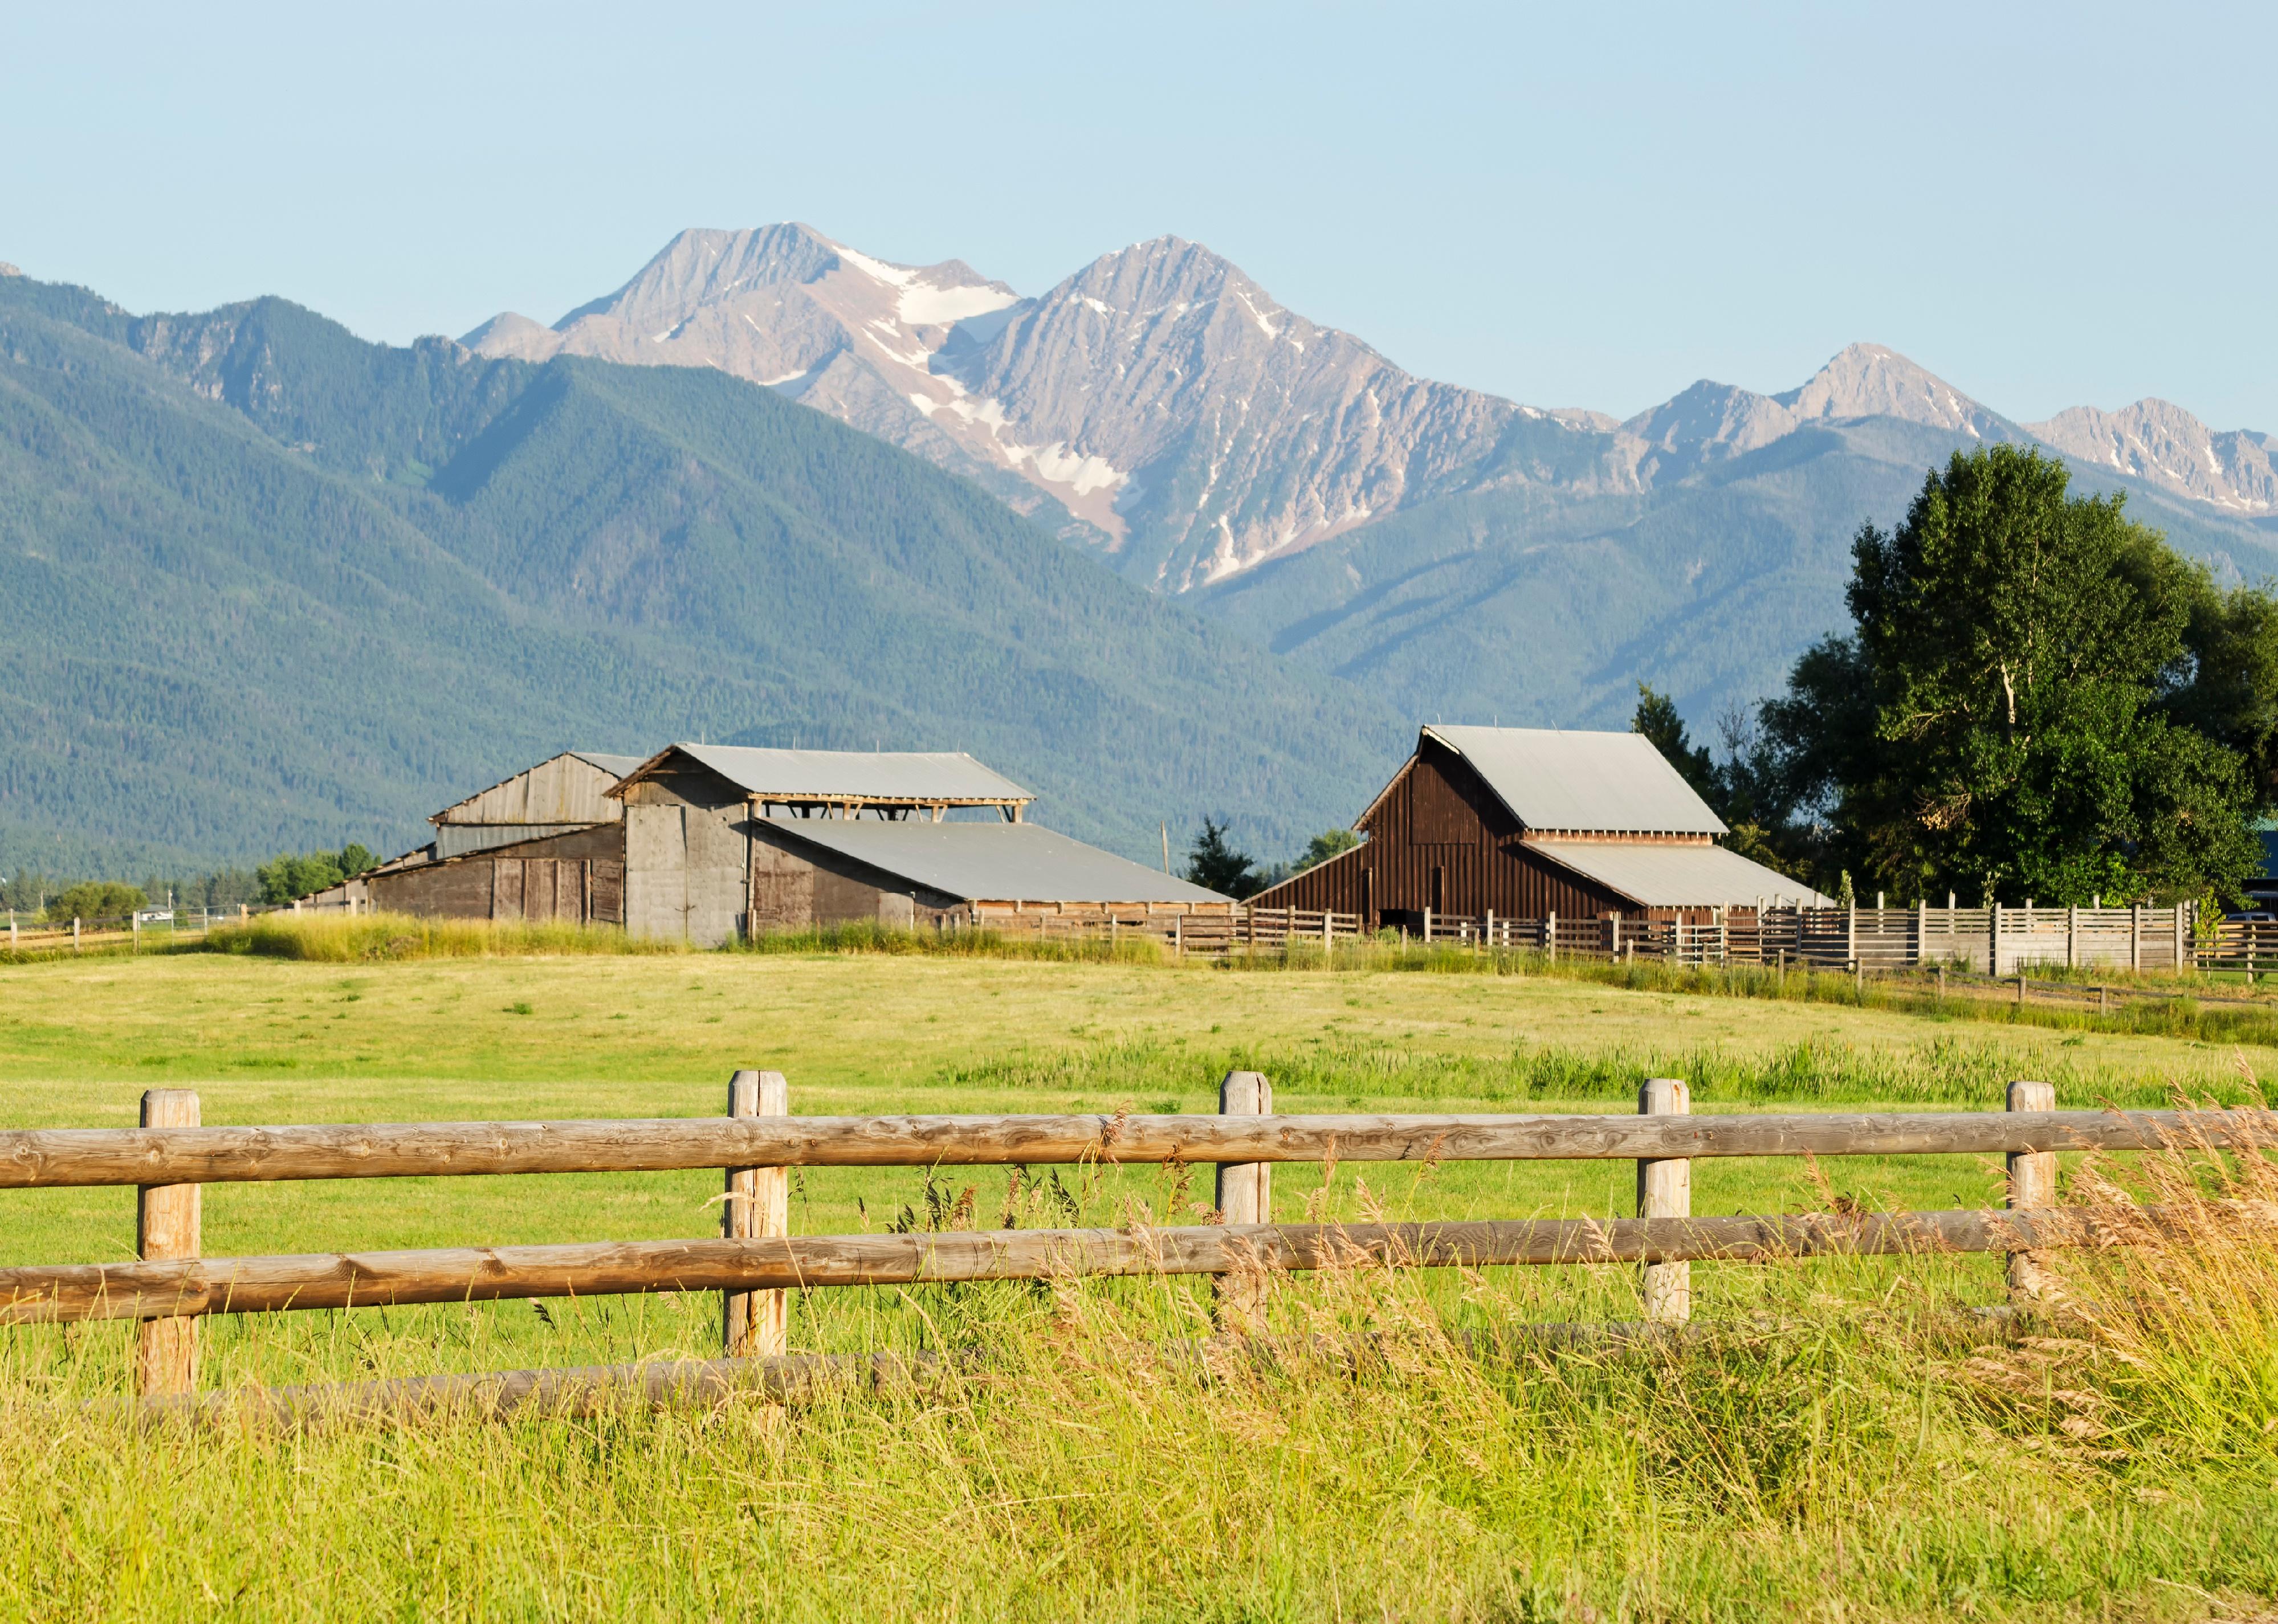 A ranch somewhere in Montana nestled beneath majestic mountains.